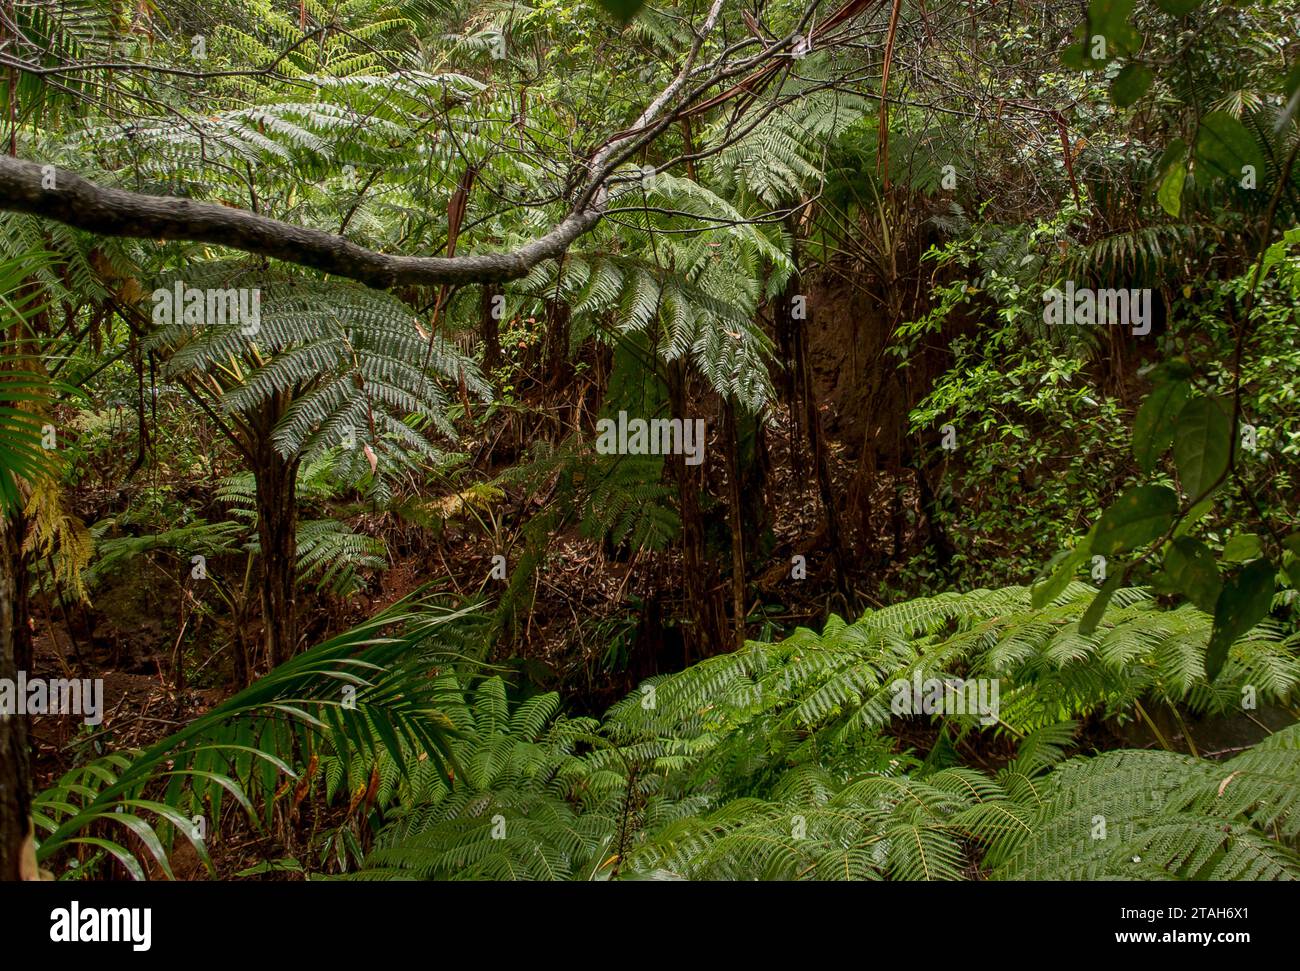 Looking over tops of wet tree ferns, Cyathea cooperi, growing in shady gully of lowland subtropical rainforest, Queensland, Australia. Stock Photo